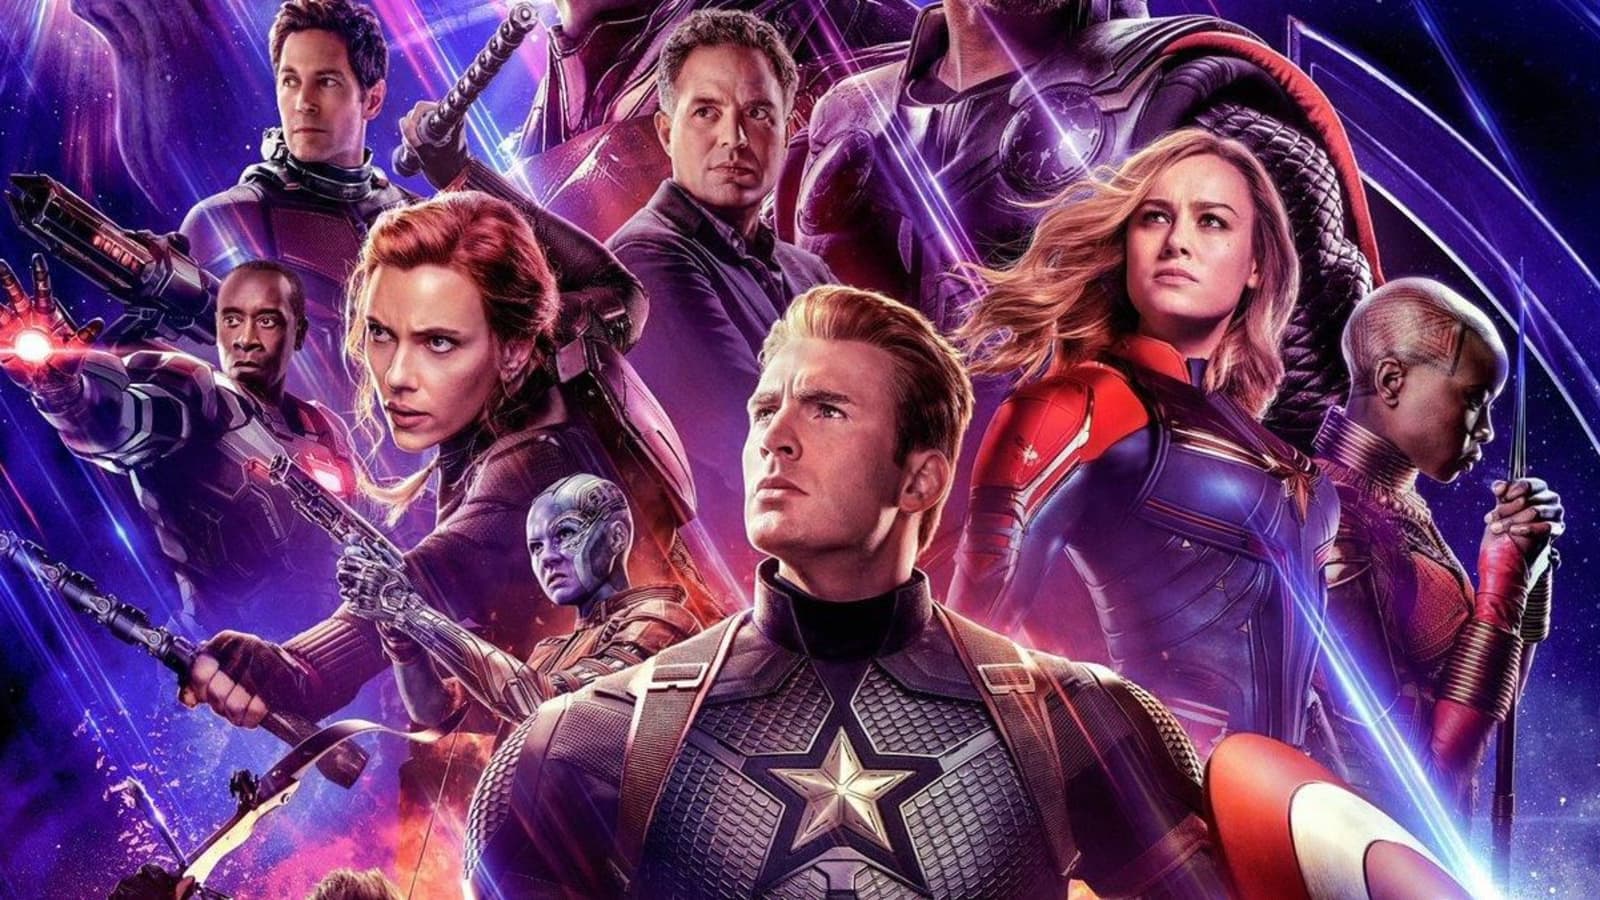 Avengers: Endgame' to be the highest-grossing film of all time